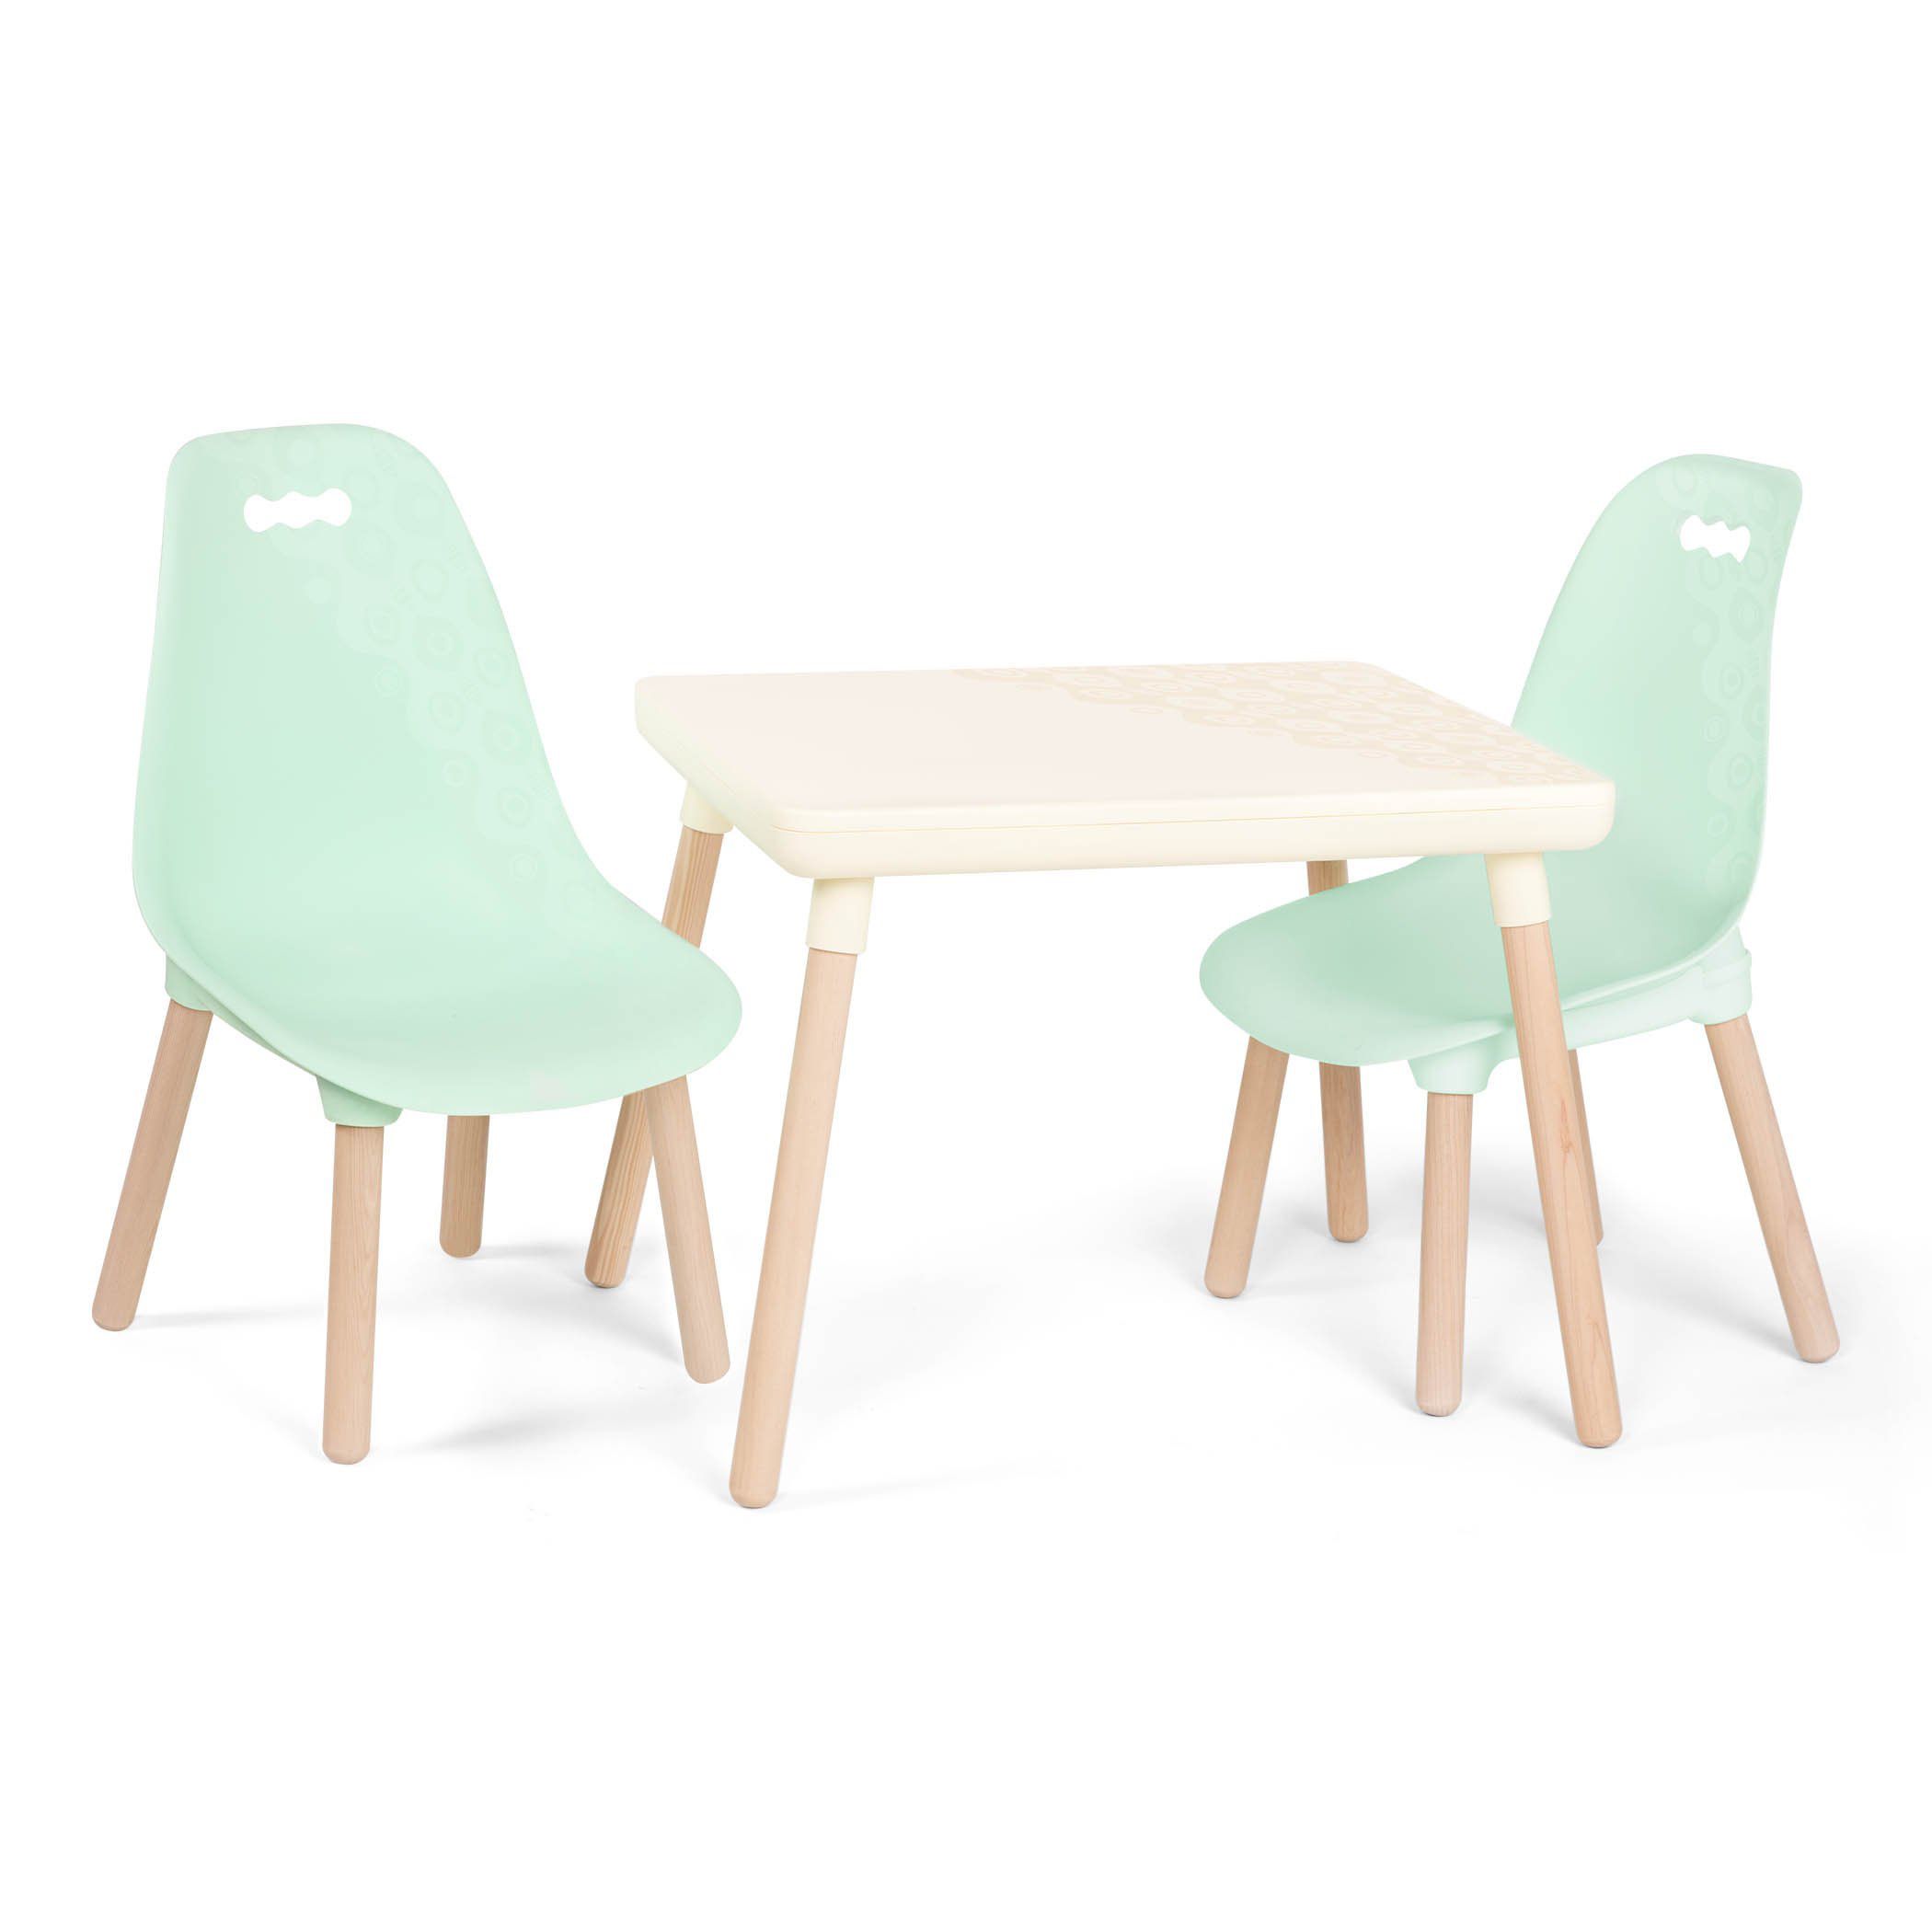 Brand New Kids Table And Chair Set